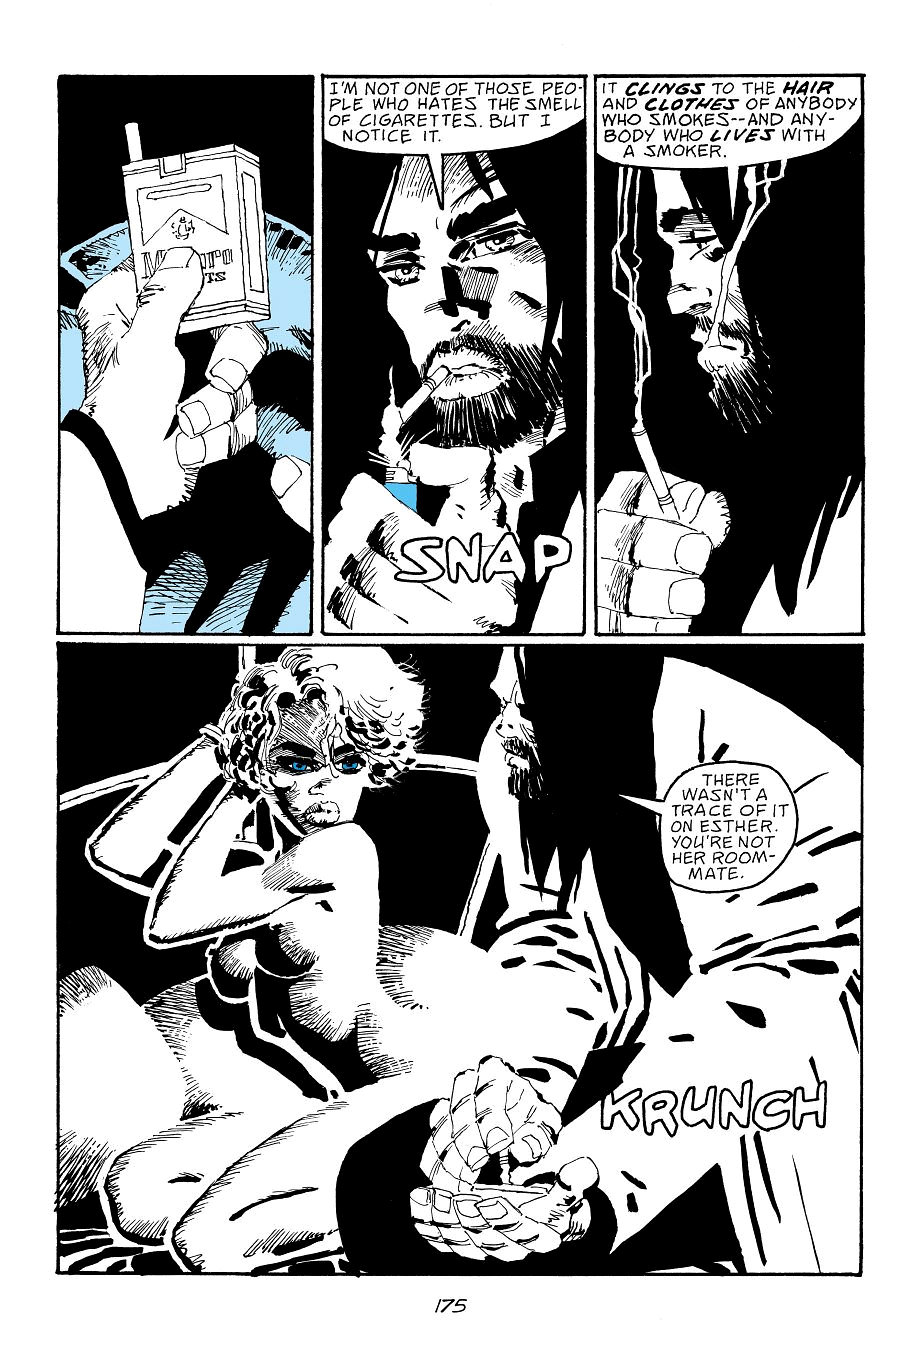 page 175 of sin city 7 hell and back